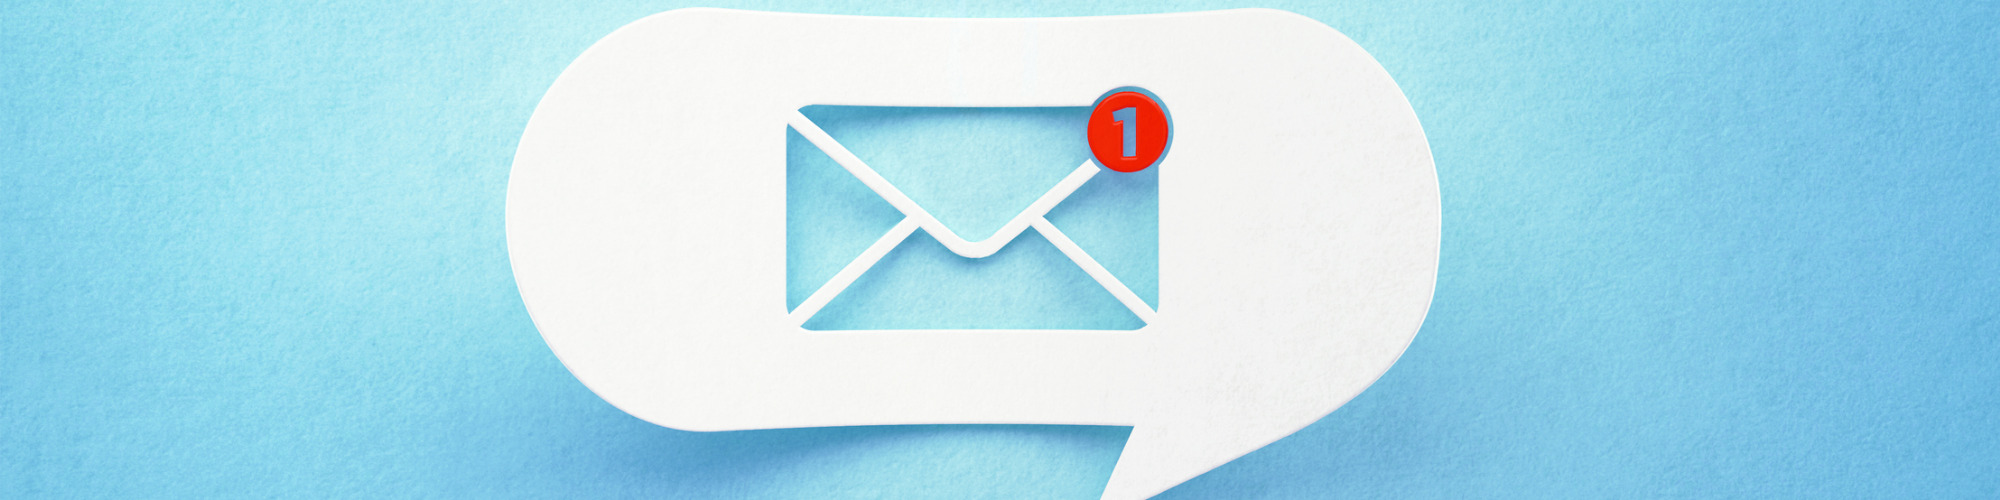 Effective Email Marketing - How to Generate More Business